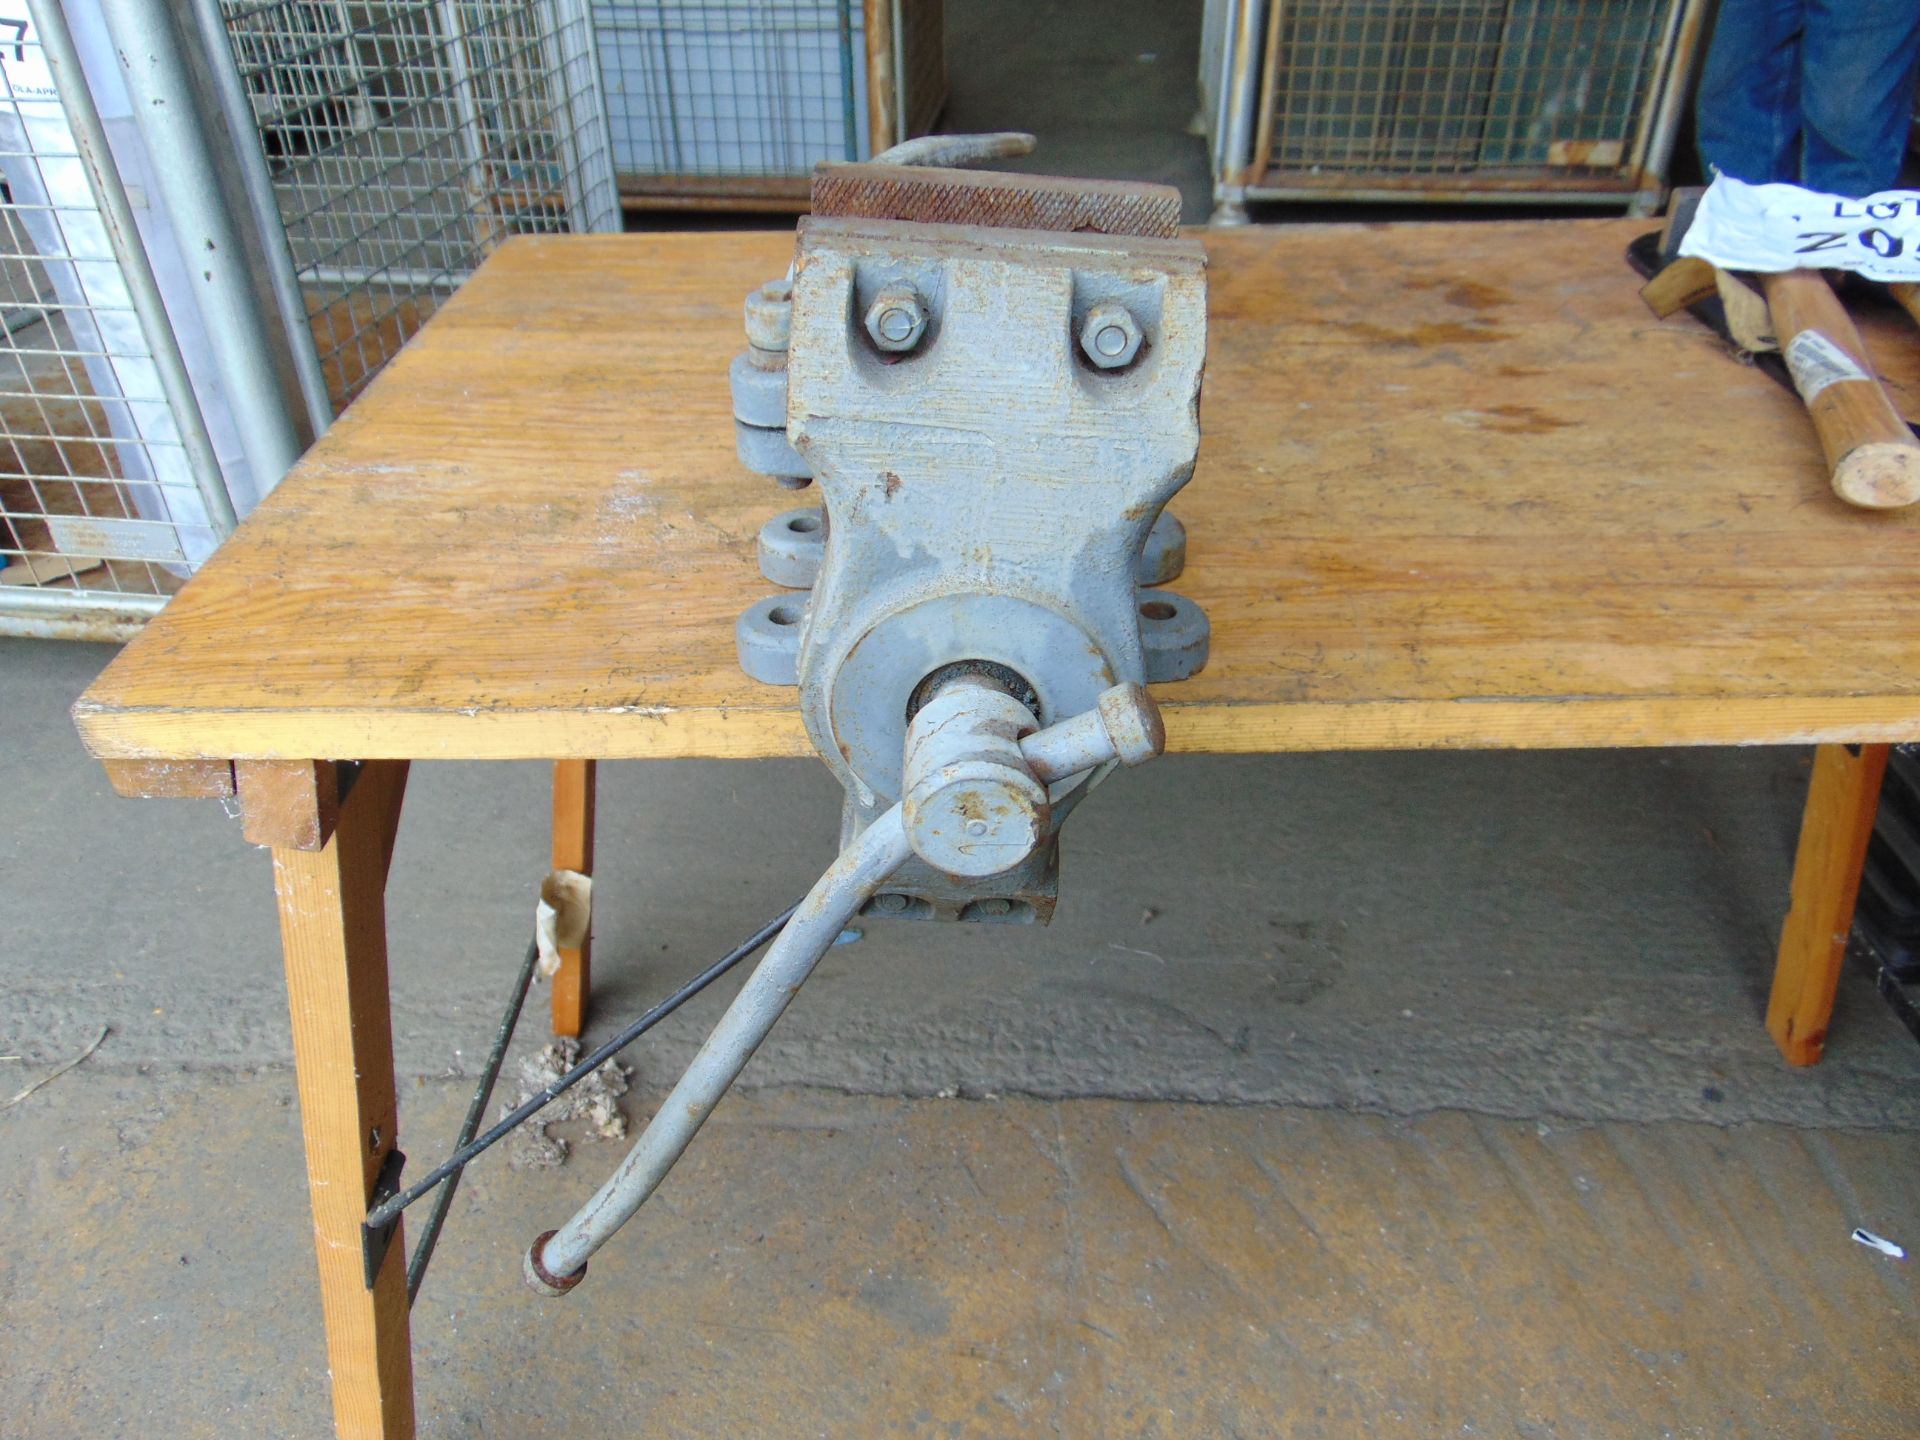 Swindens Patent Double Jaw Revolving Bench Vice - Image 3 of 17